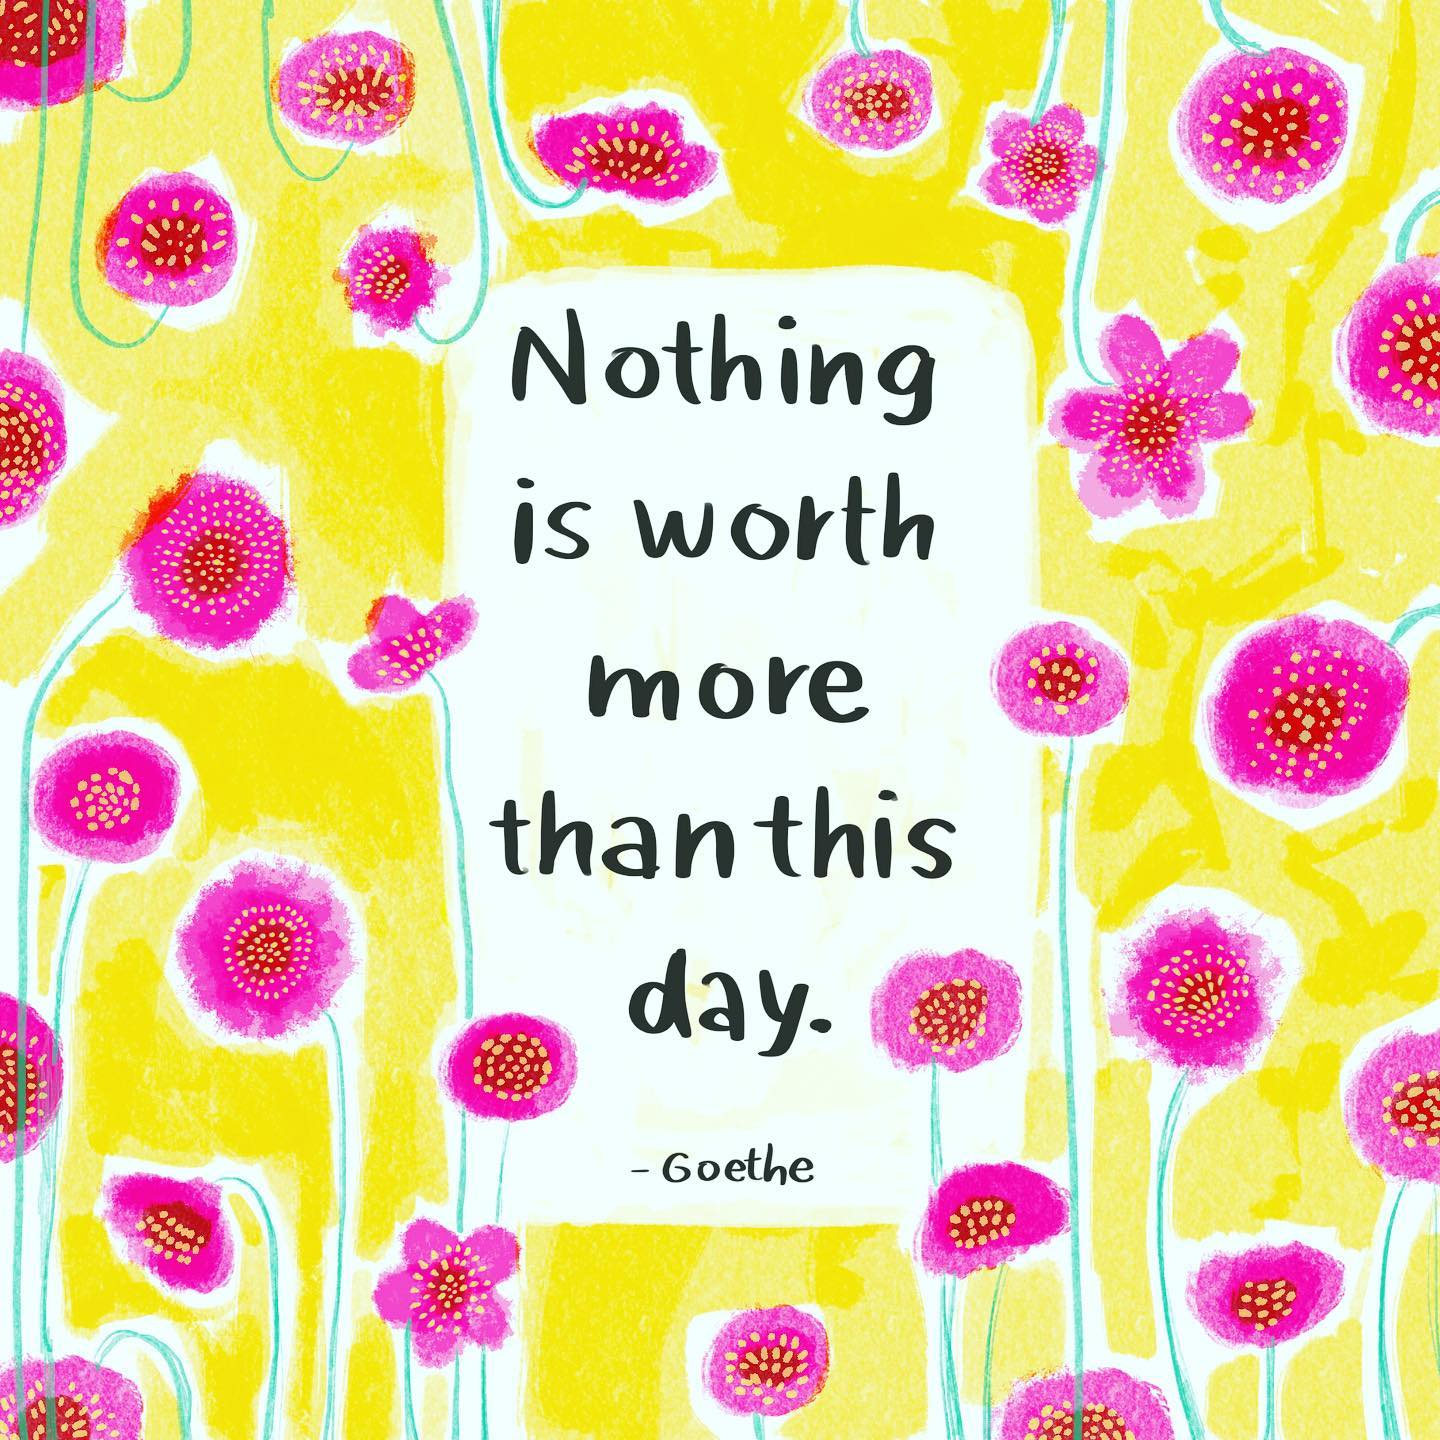 Nothing is worth more than this day.
- Goethe